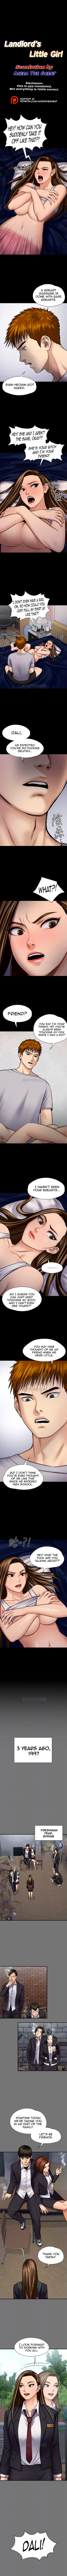 Panel Image 1 for chapter 117 of manhwa Queen Bee on read.oppai.stream